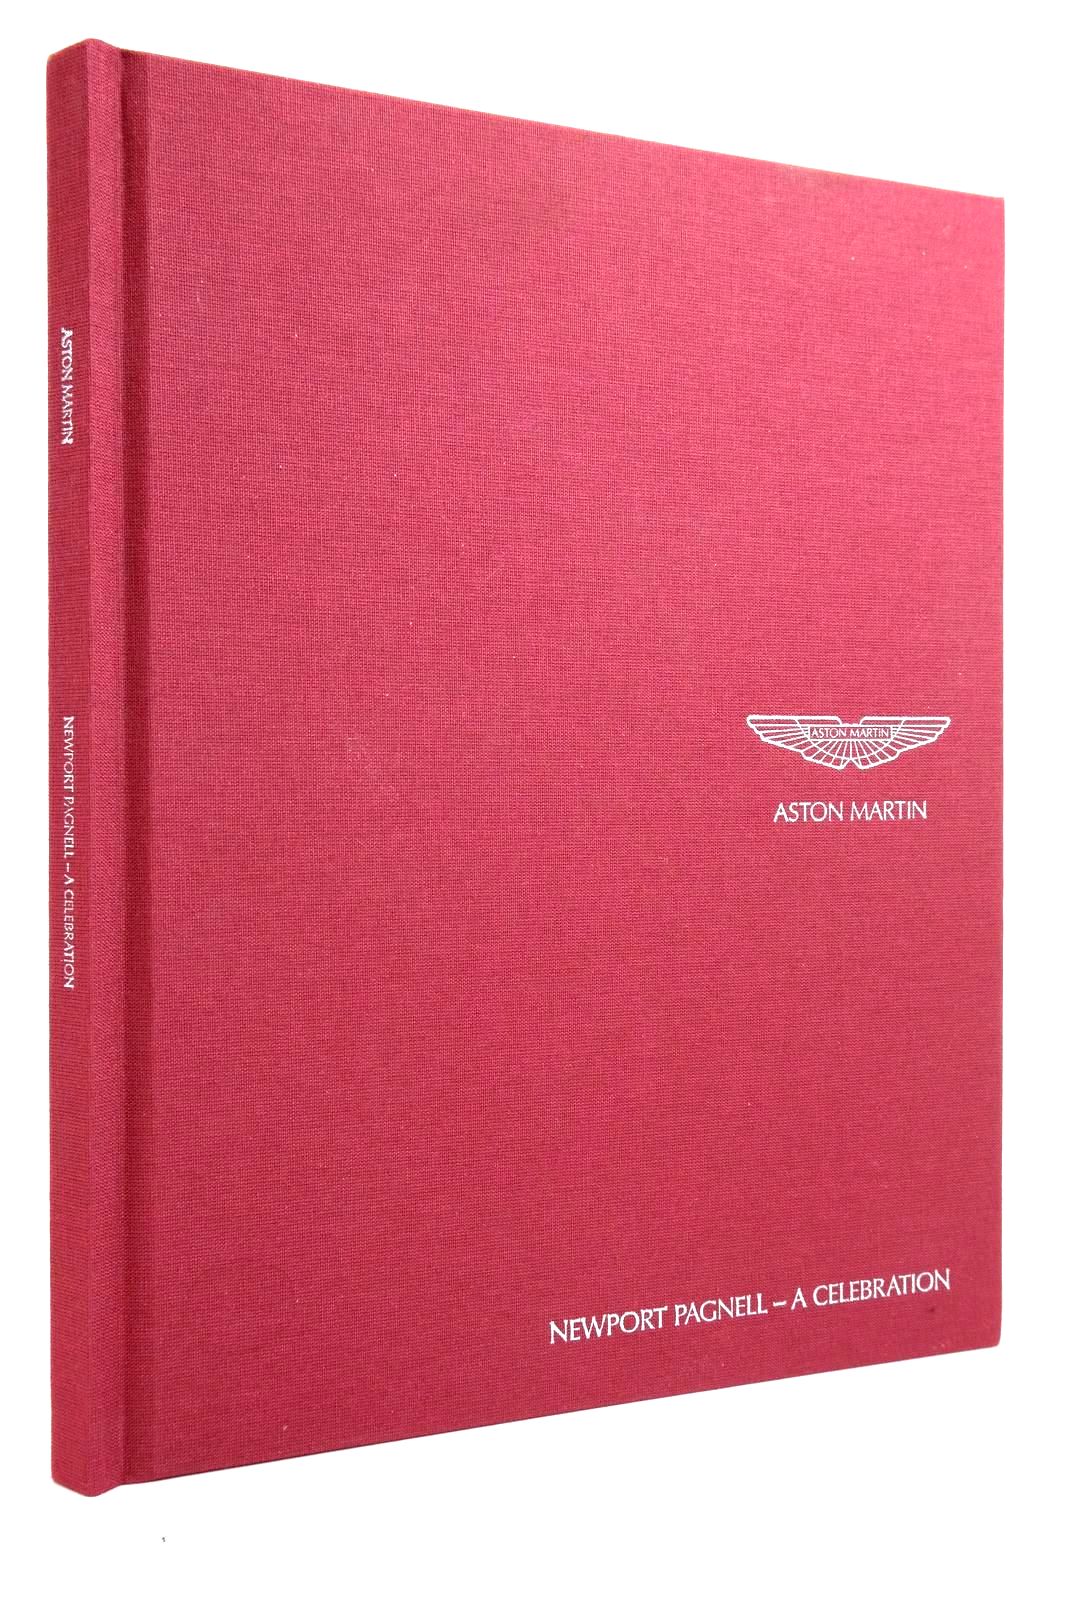 Photo of ASTON MARTIN: NEWPORT PAGNELL - A CELEBRATION written by Gibson, Ken published by Aston Martin Lagonda Limited (STOCK CODE: 2135698)  for sale by Stella & Rose's Books